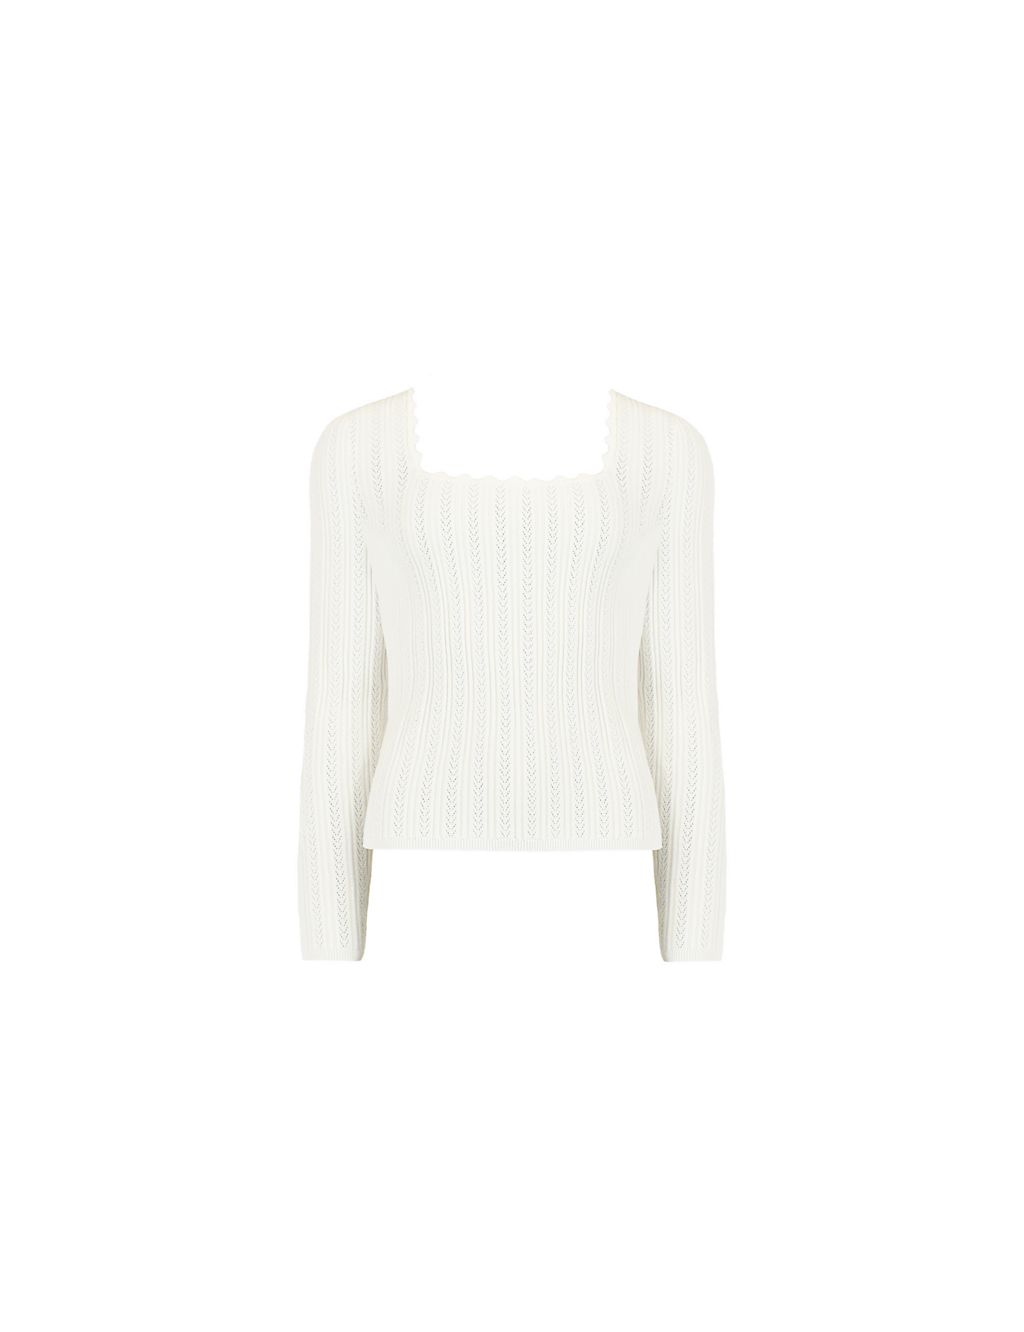 Square Neck Scallop Edge Knitted Top 1 of 6